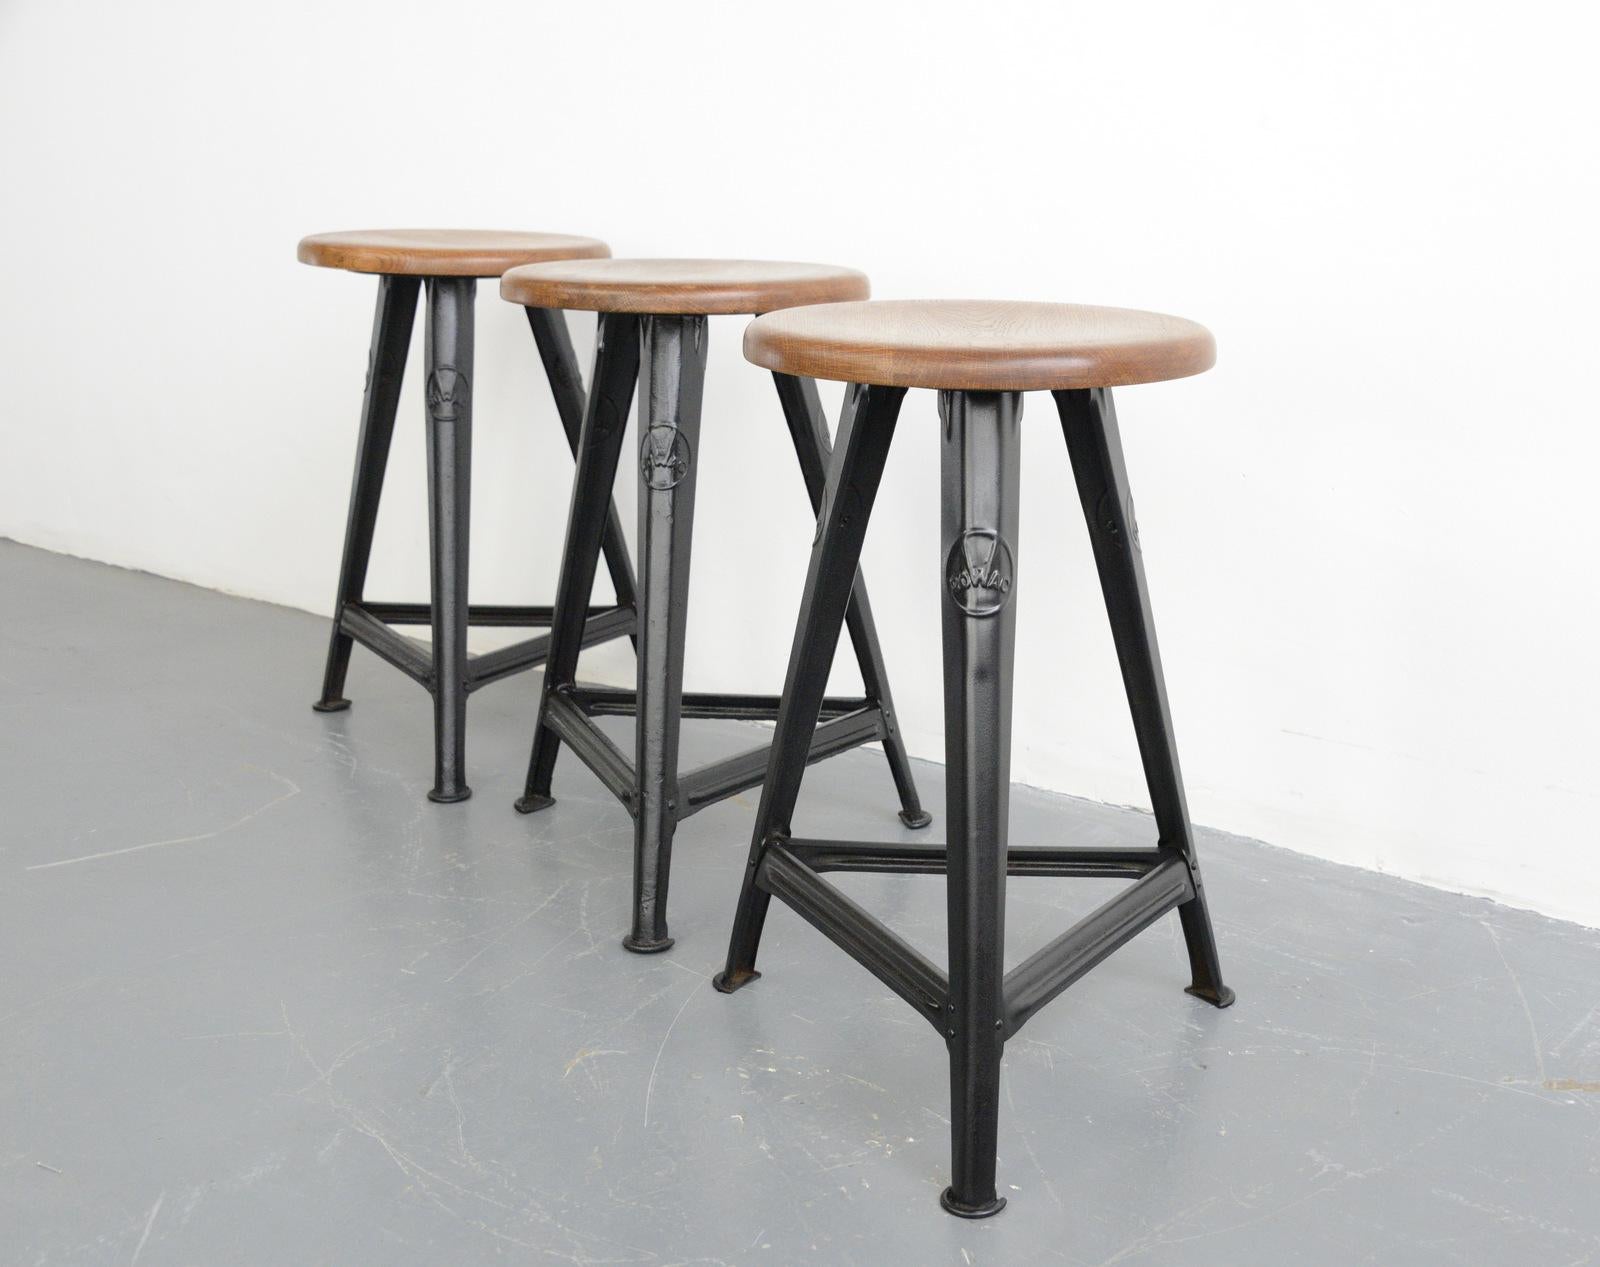 Industrial factory stools by Rowac, circa 1920s

- Price is per stool
- Branded on all 3 legs
- By Robert Wagner, Chemnitz
- German, 1920s
- Measures: 61 cm tall

Rowac

Robert Wagner’s founded his company in 1888 in Chemnitz, better known